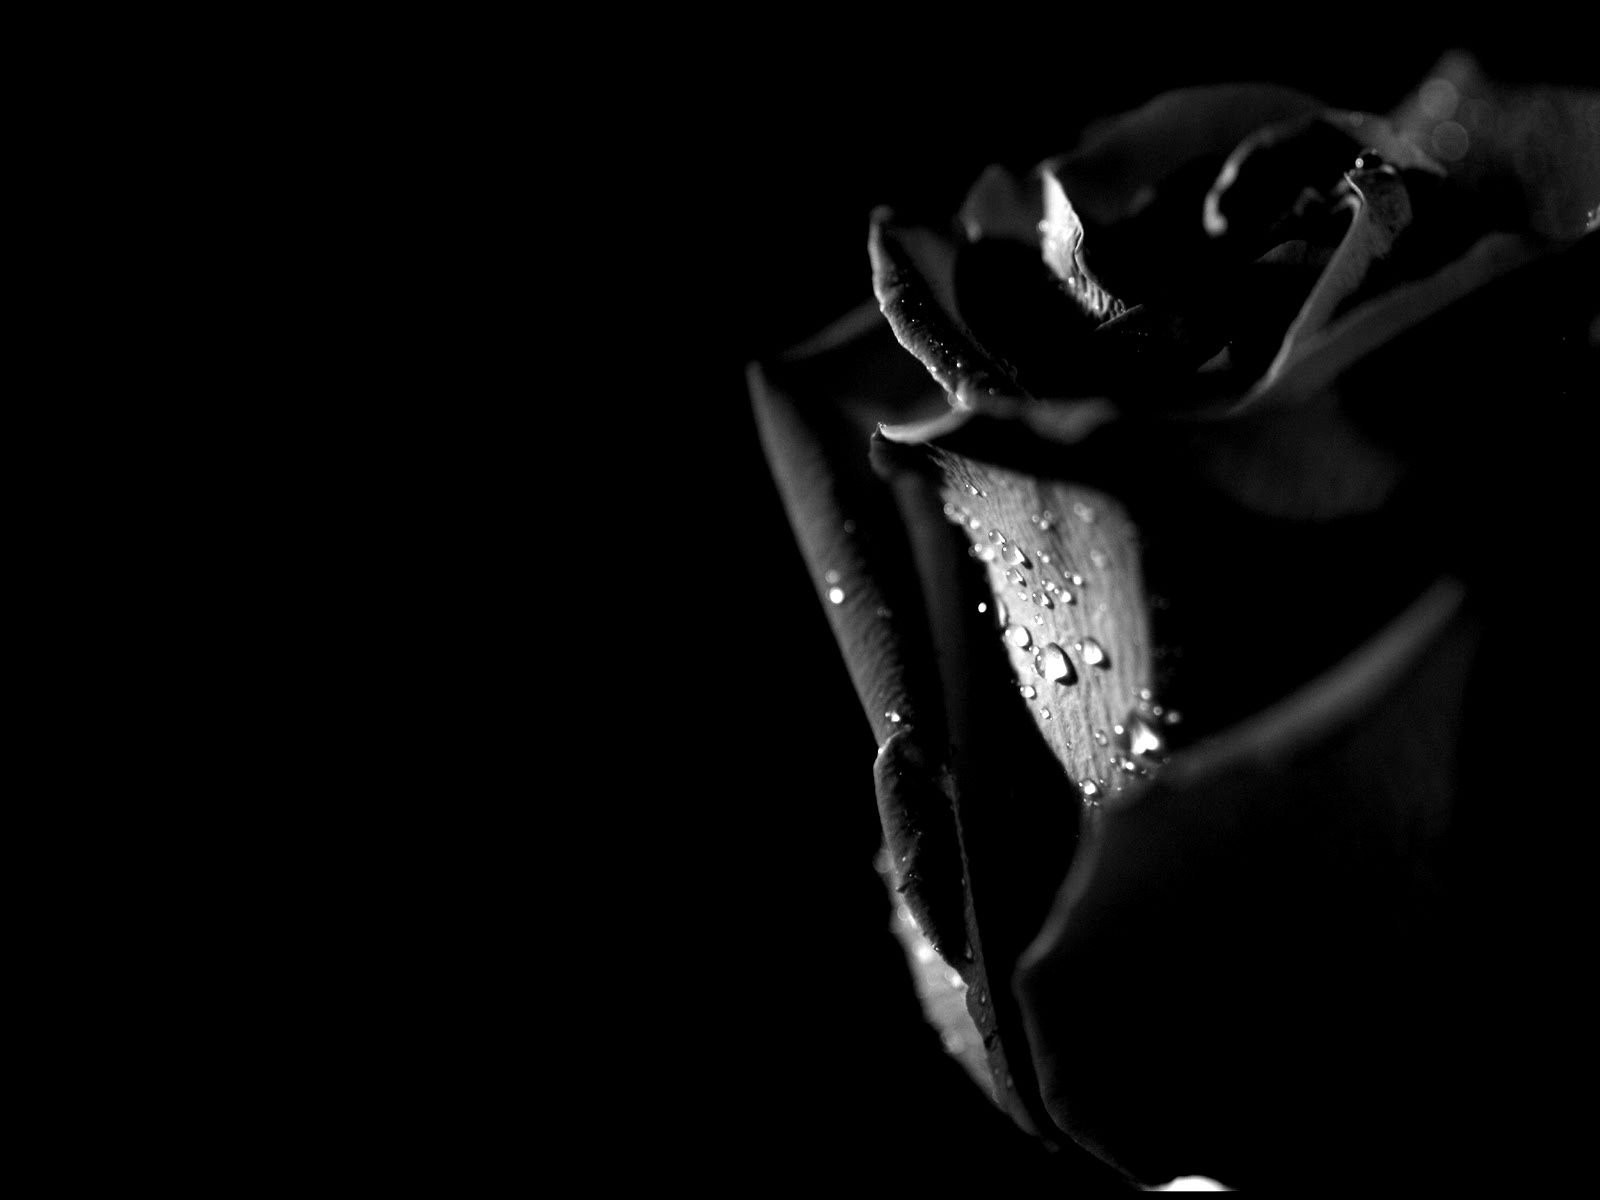 Beautiful Black Roses HD Wallpaper Flowers Pictures